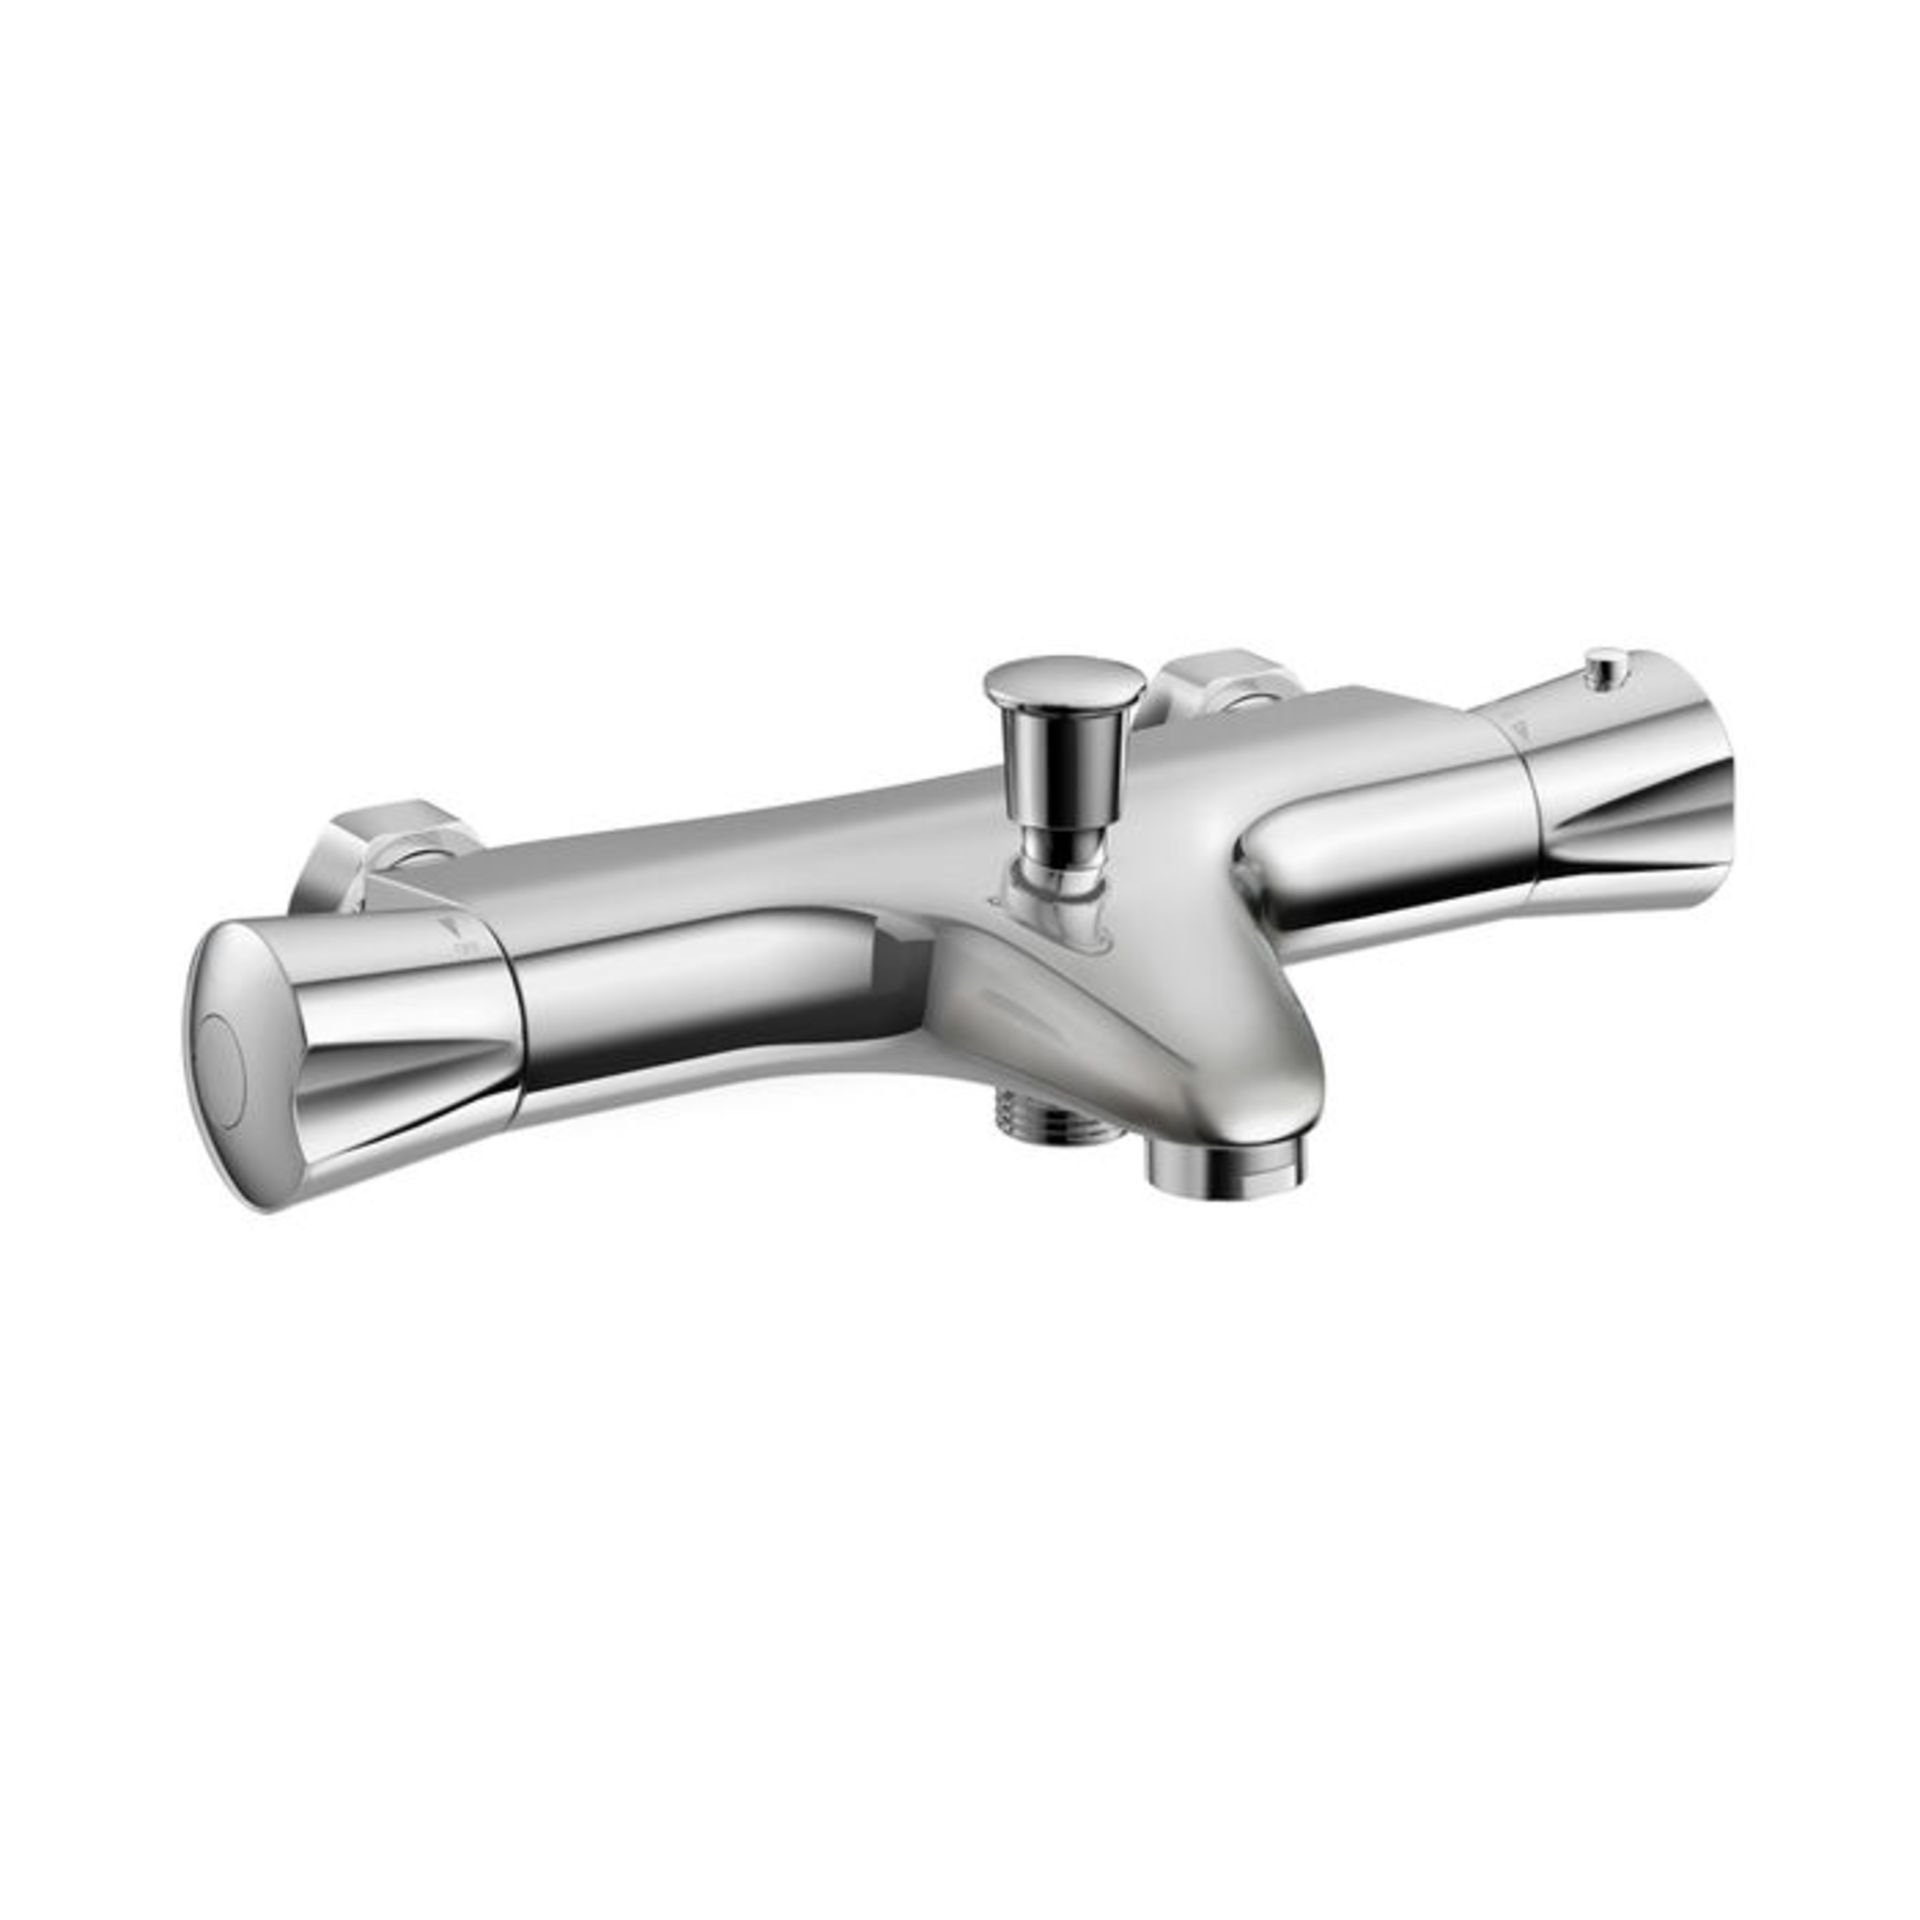 (RK1027) Shower Mixer Valve with Bath Filler. Rrp £192.99. Chrome Plated Solid Brass Mixer Th... - Image 3 of 3